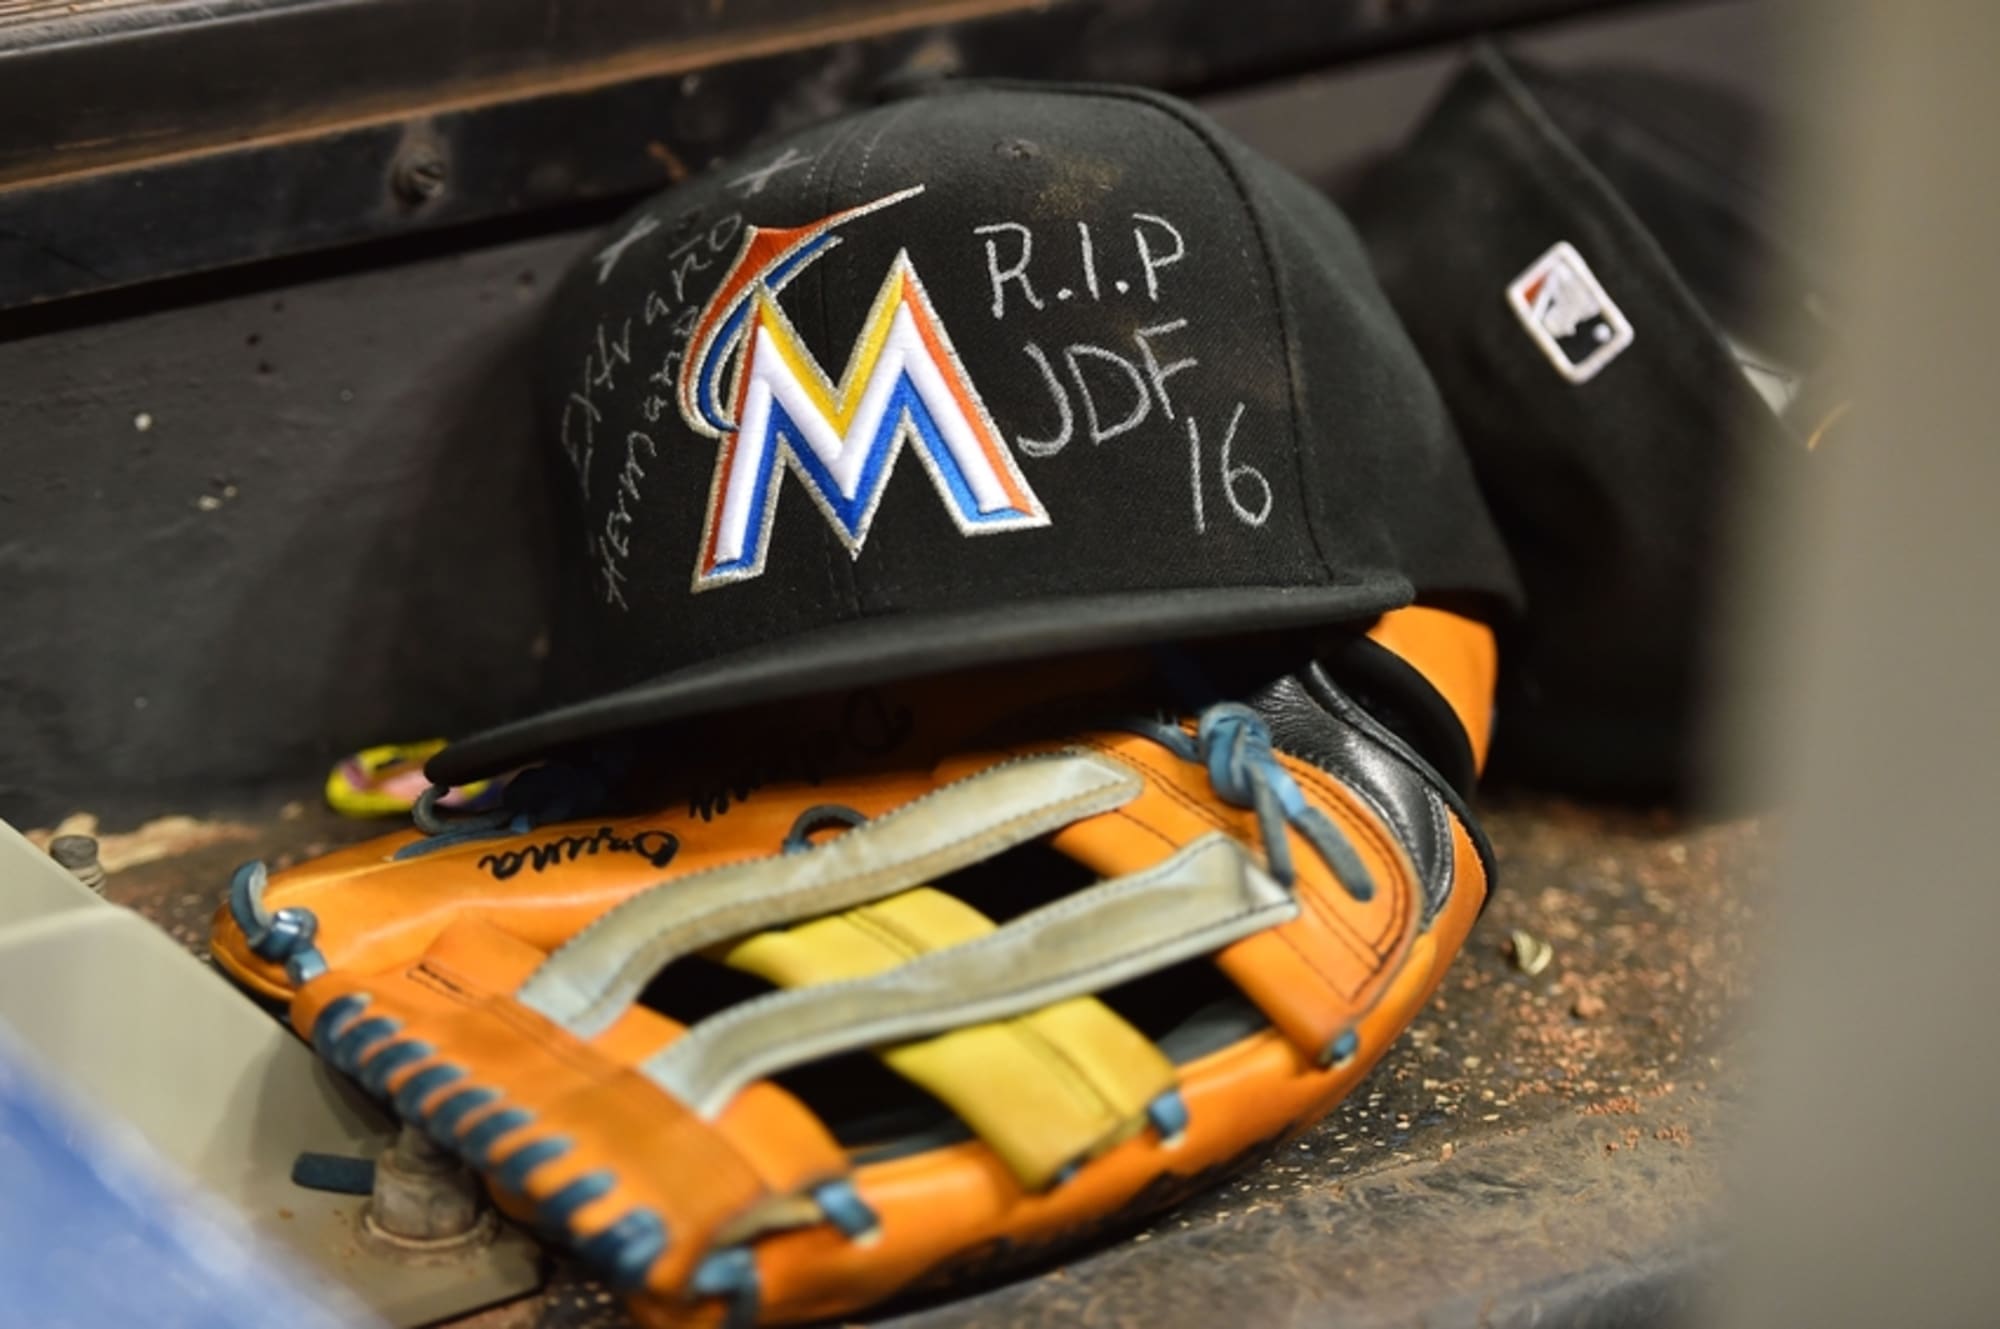 Marlins Pitcher Jose Fernandez Is Killed in a Boating Accident - The New  York Times